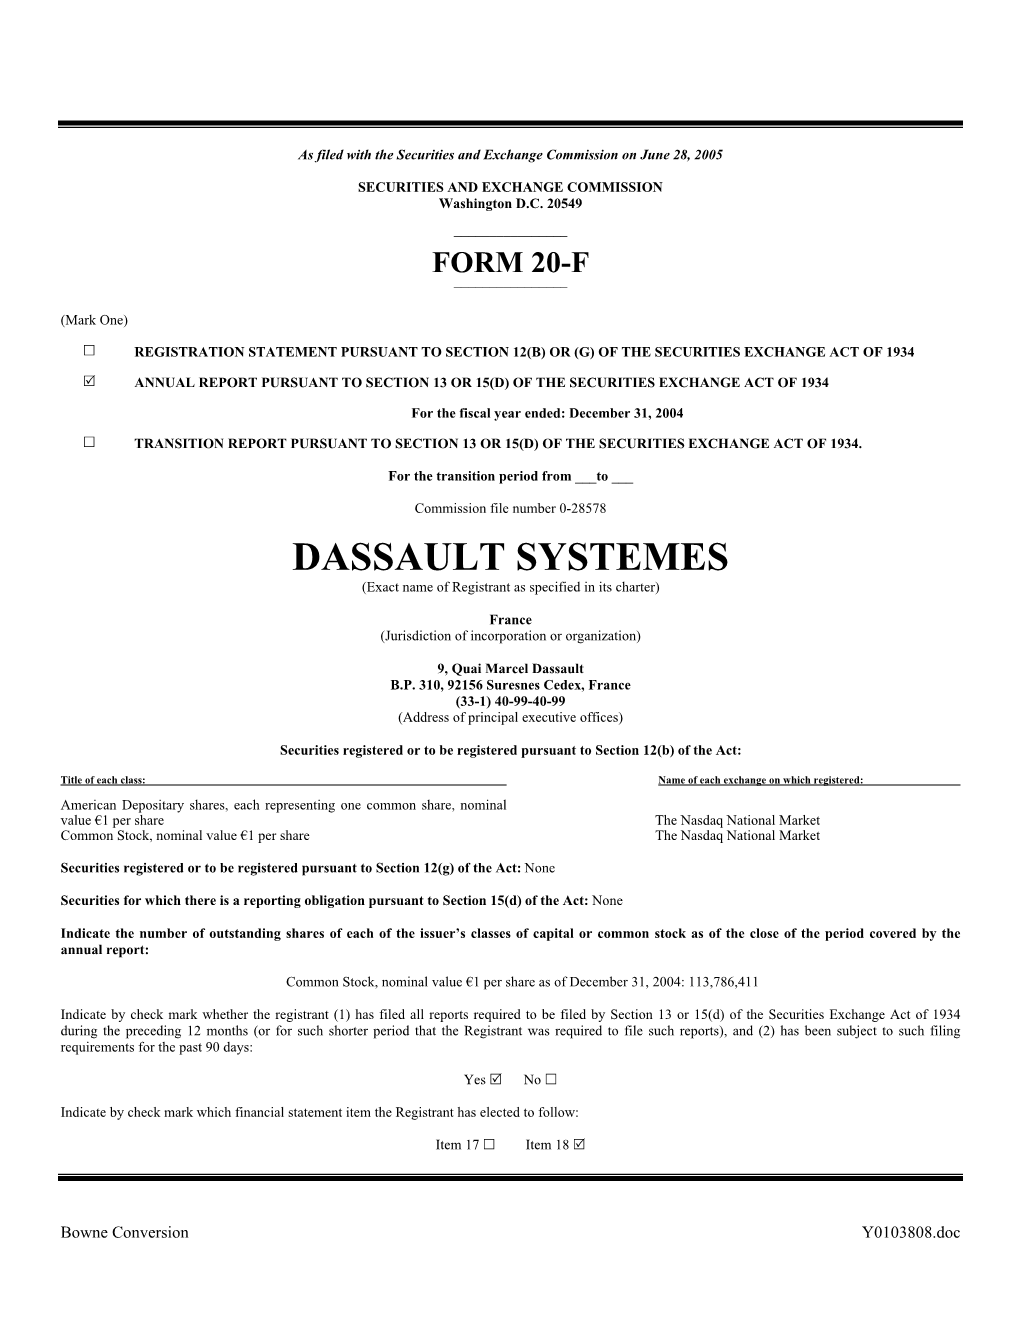 DASSAULT SYSTEMES (Exact Name of Registrant As Specified in Its Charter)